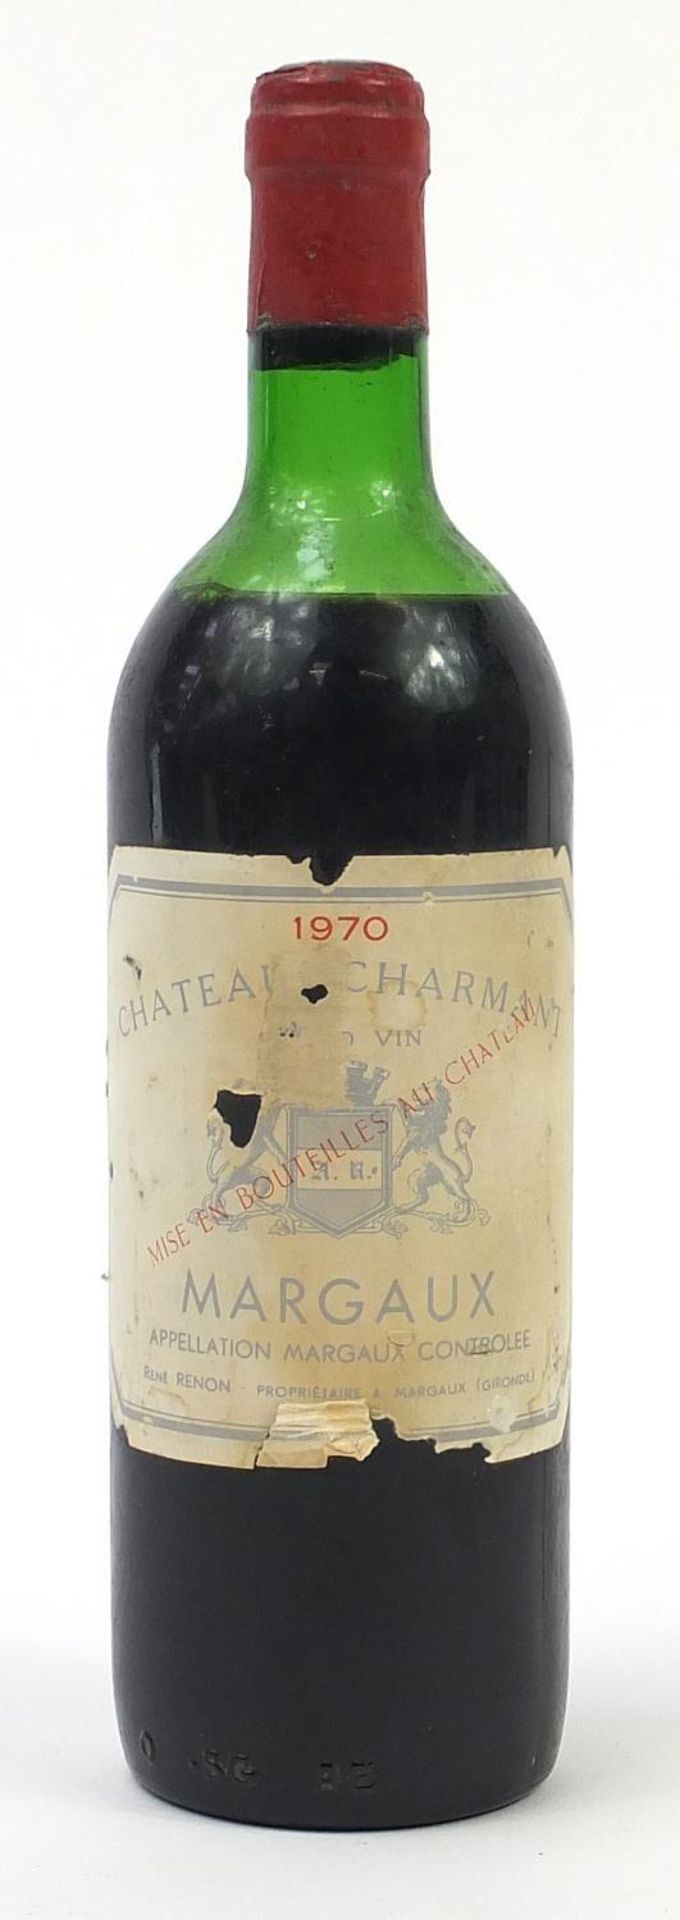 Bottle of 1970 Château Charmant Margaux red wine :